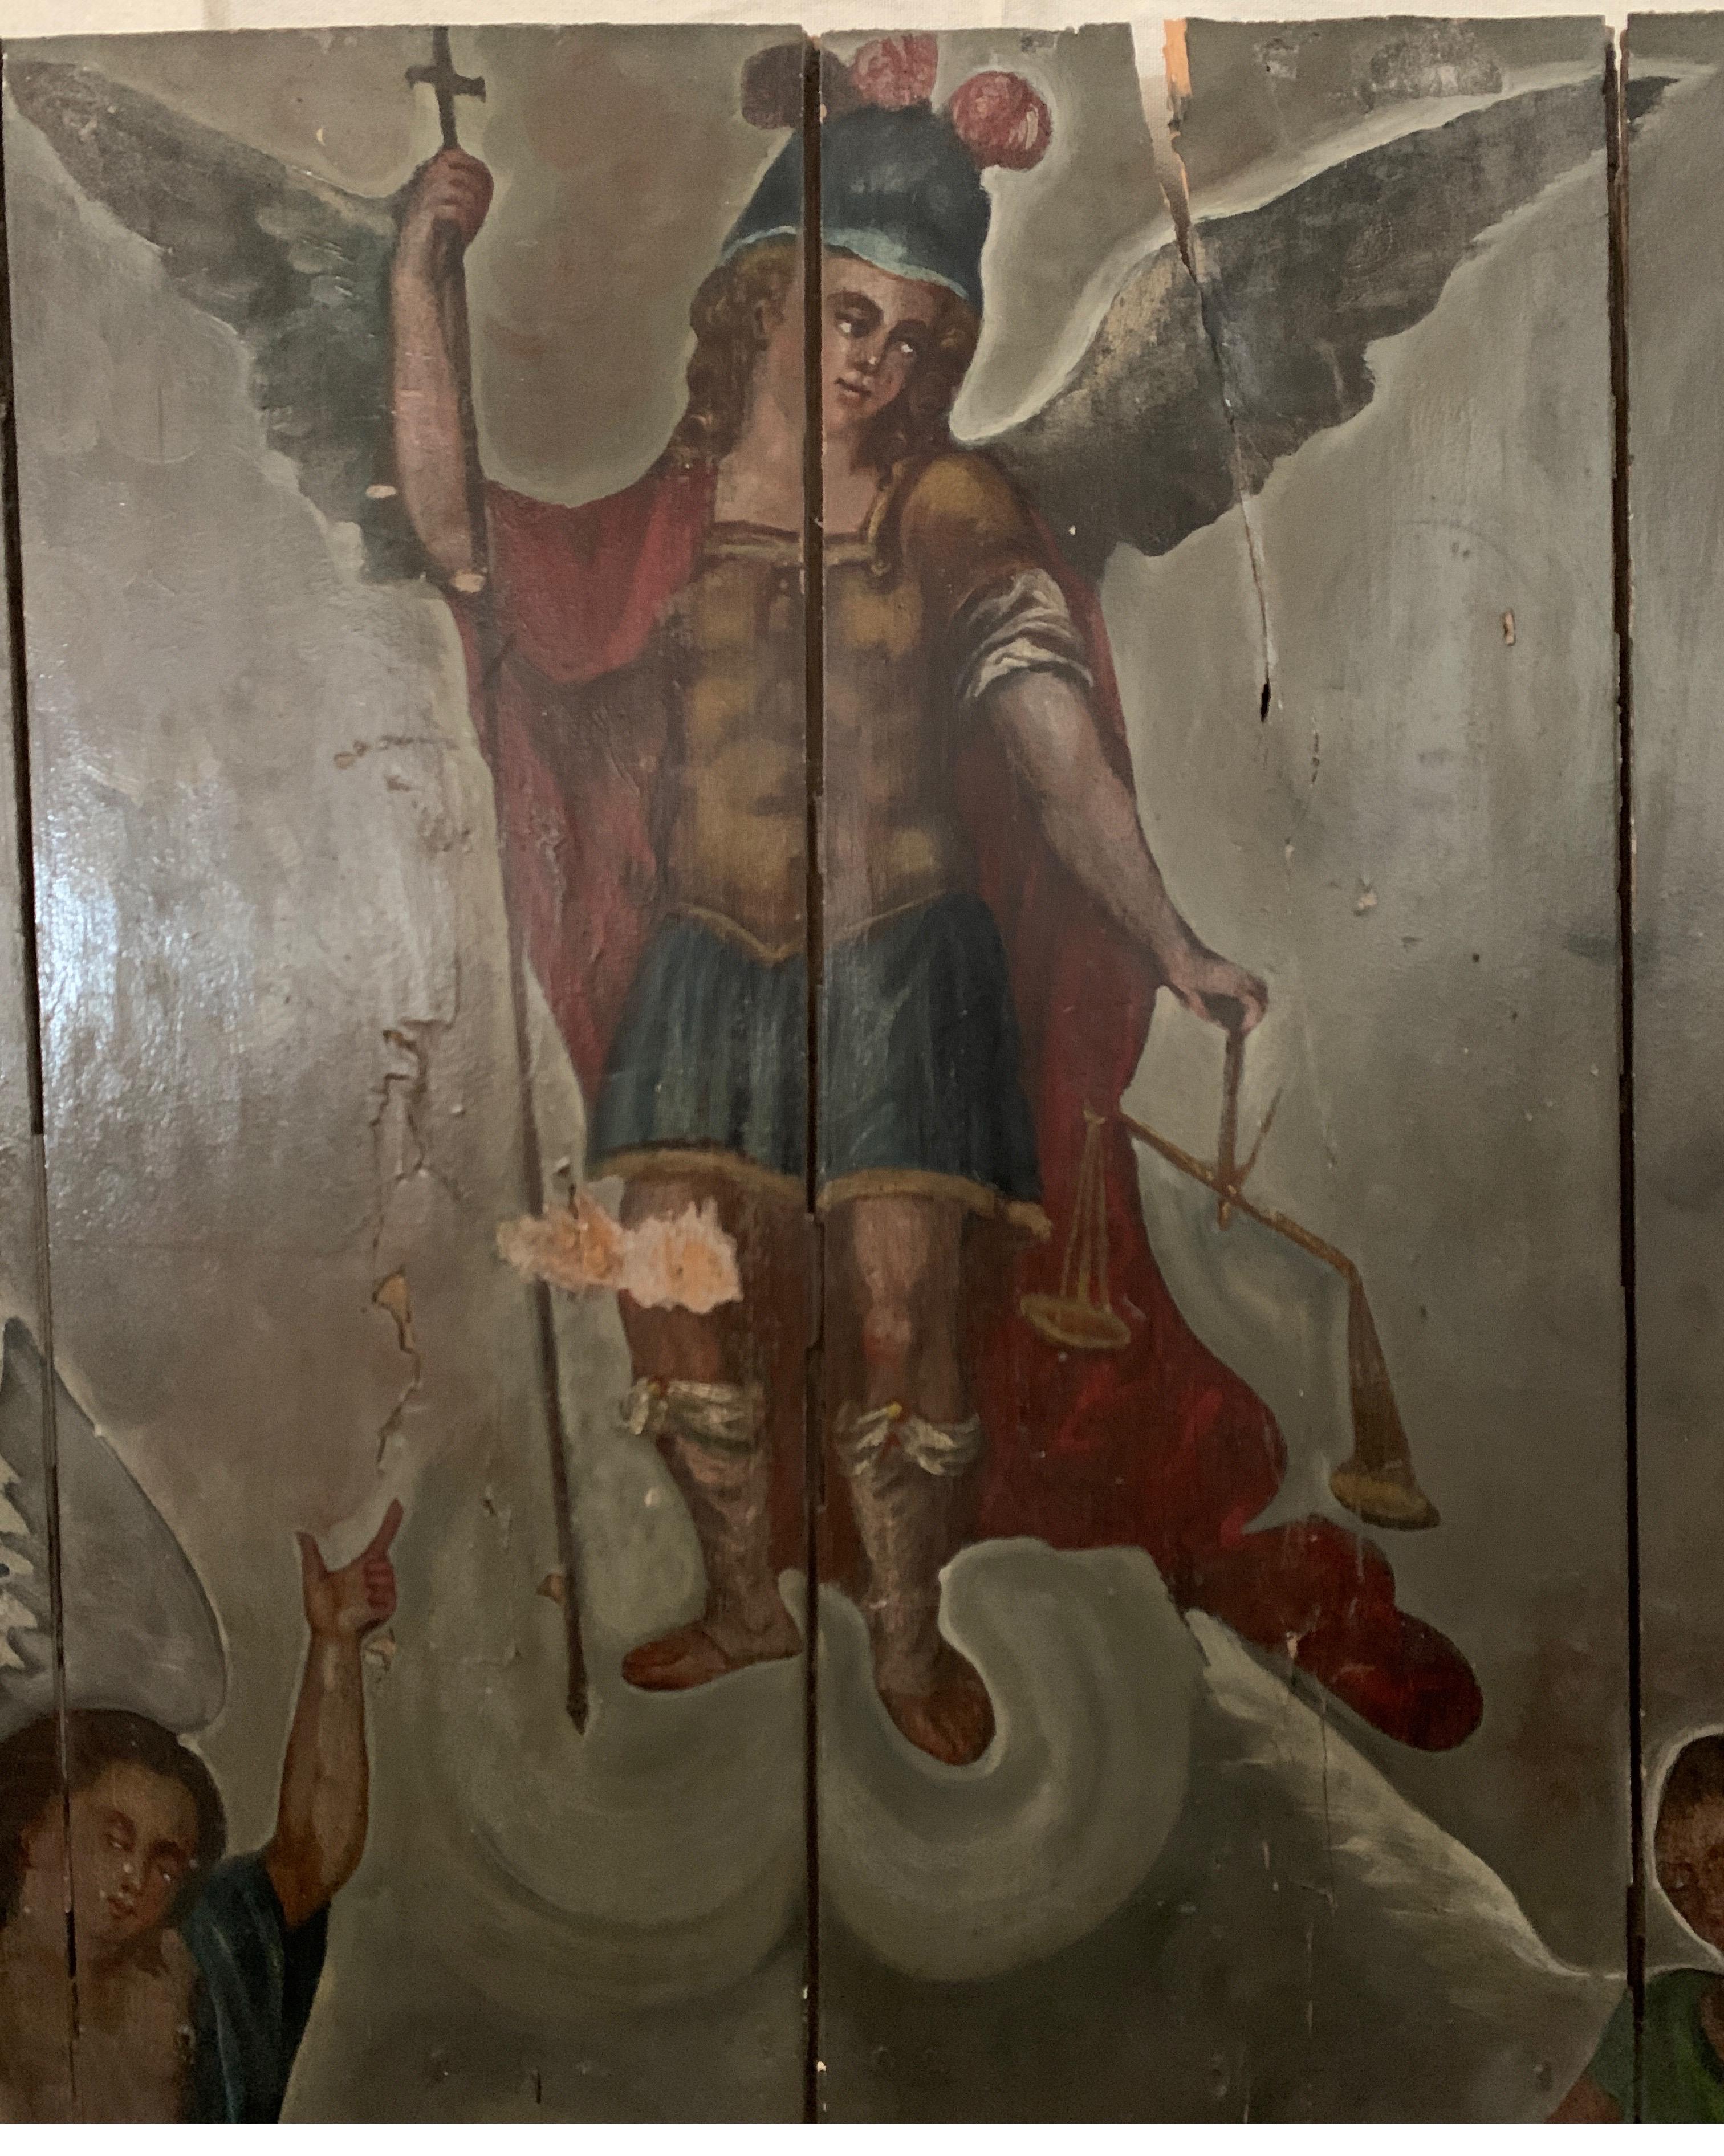 This is an old Spanish hand painted panel that's from a church alter. It's got nice colors and missing just a few spots. I have shown several closeups to see the quality. It's depicting Saint Michael the archangel and the descent into hades. Hades